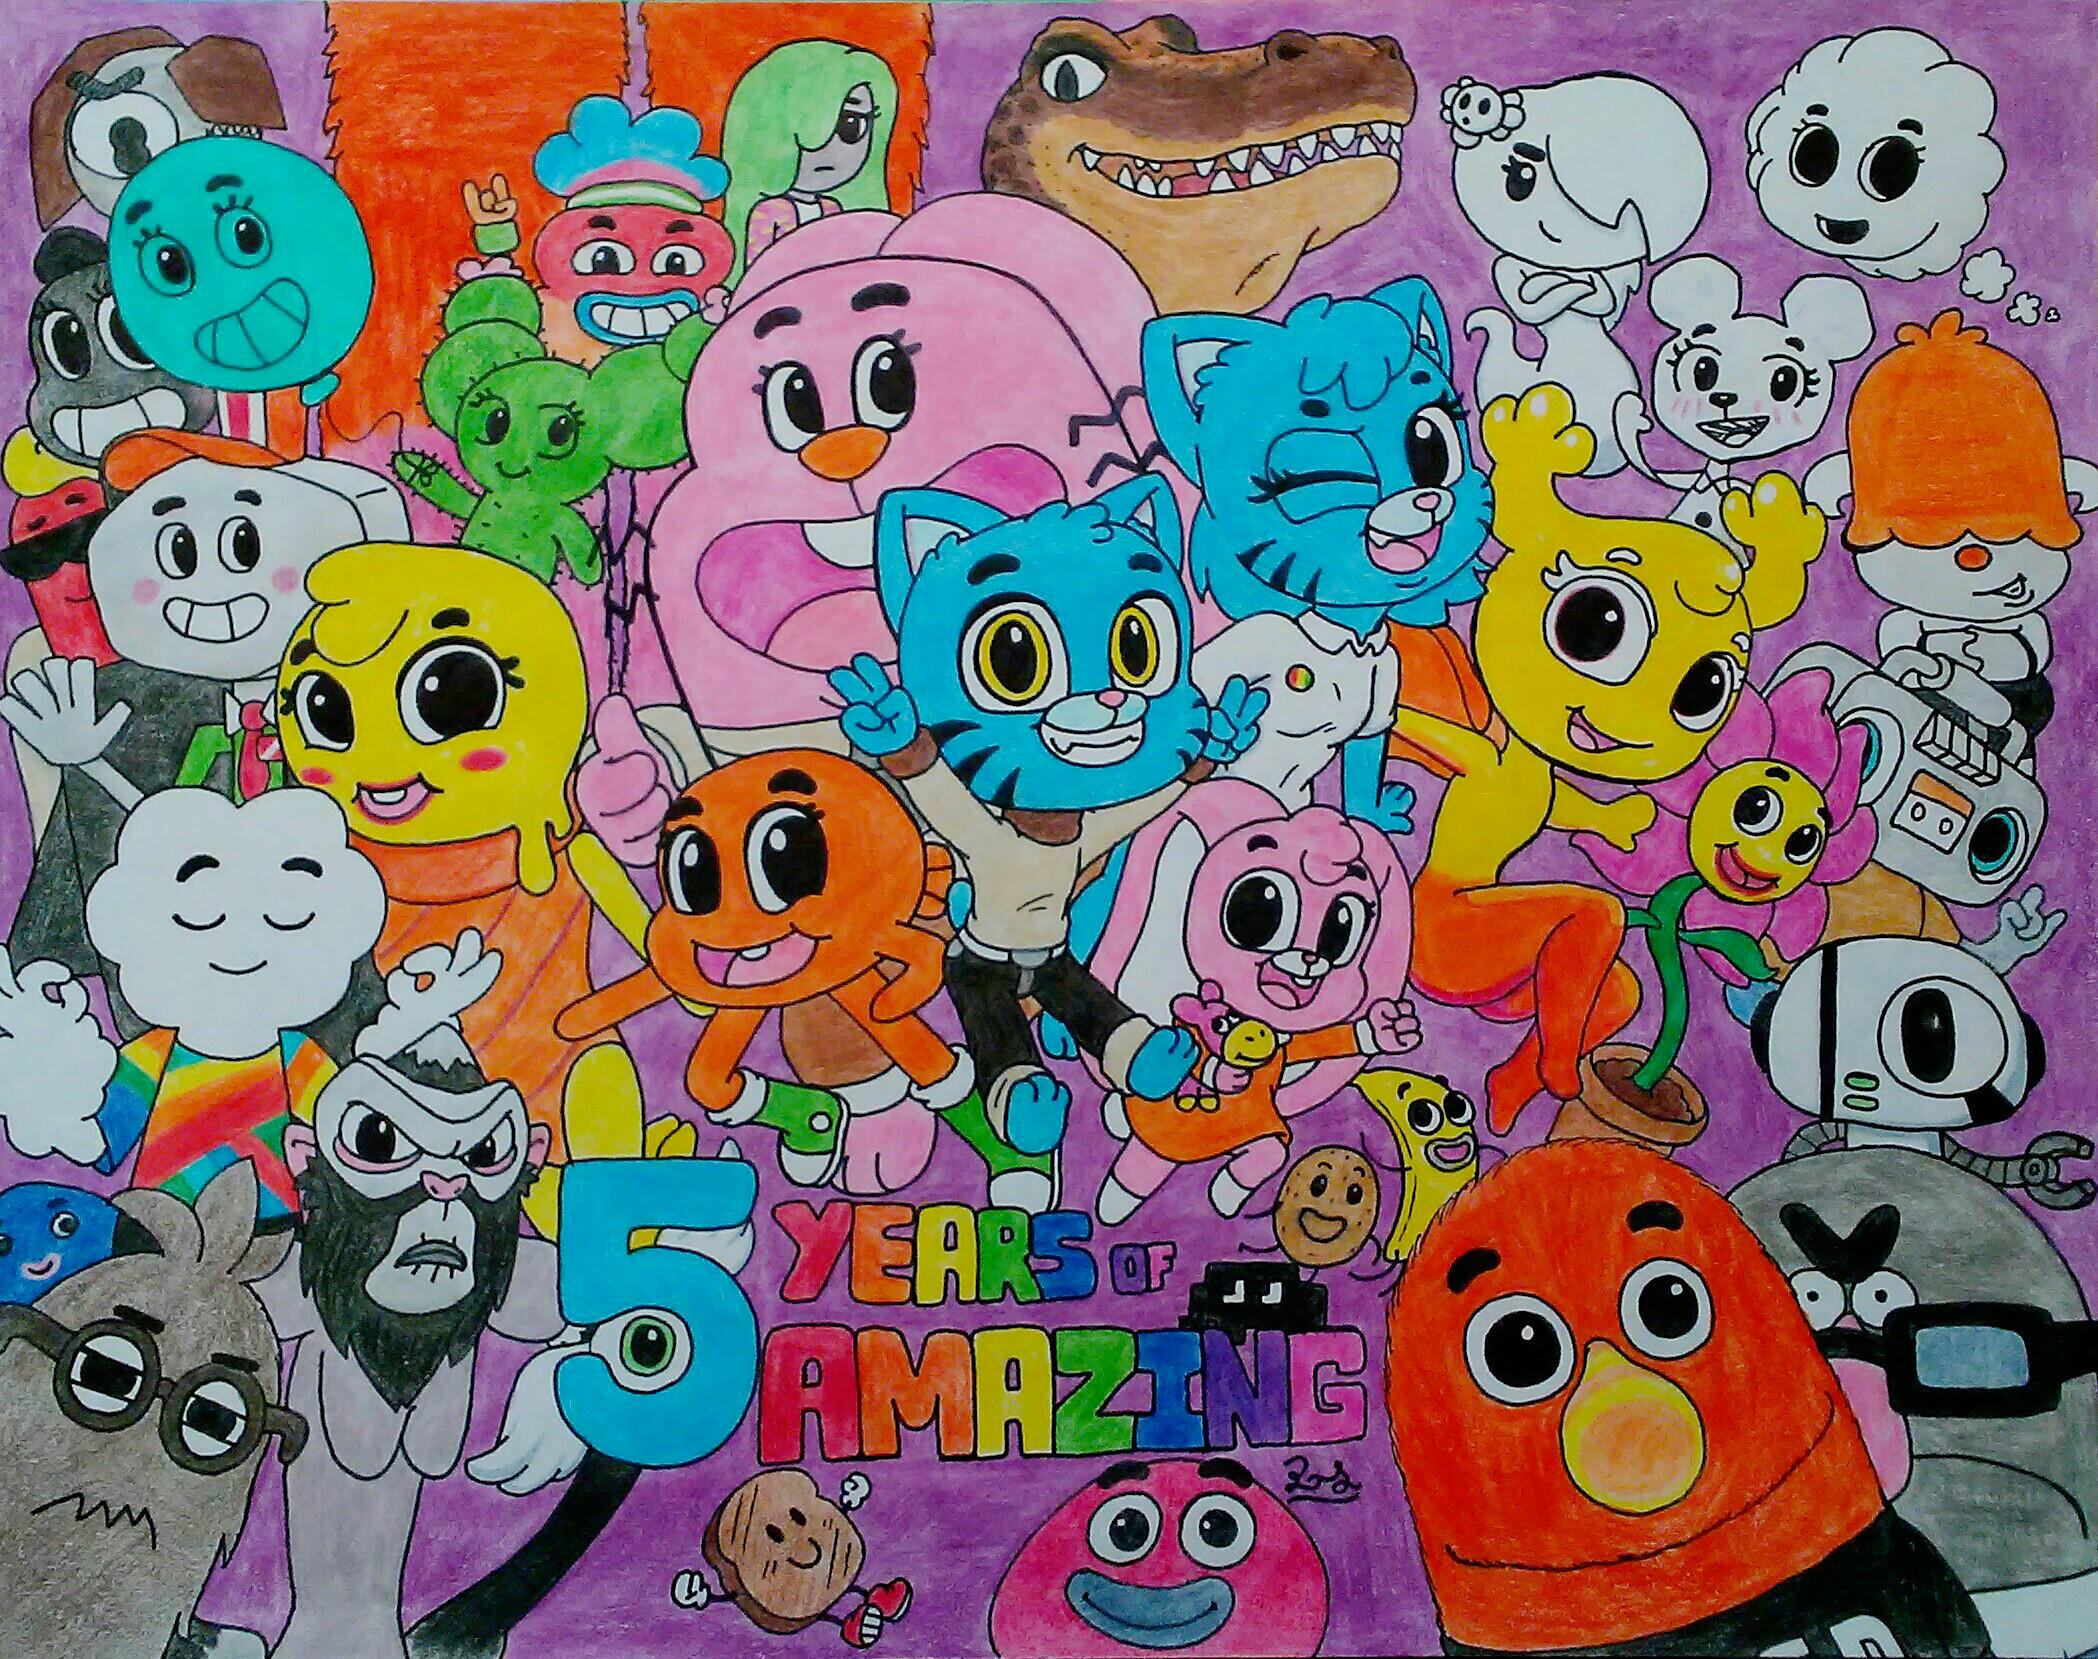 world of. #amazing. year 5 by #pillothestar on. #gumball. the. 